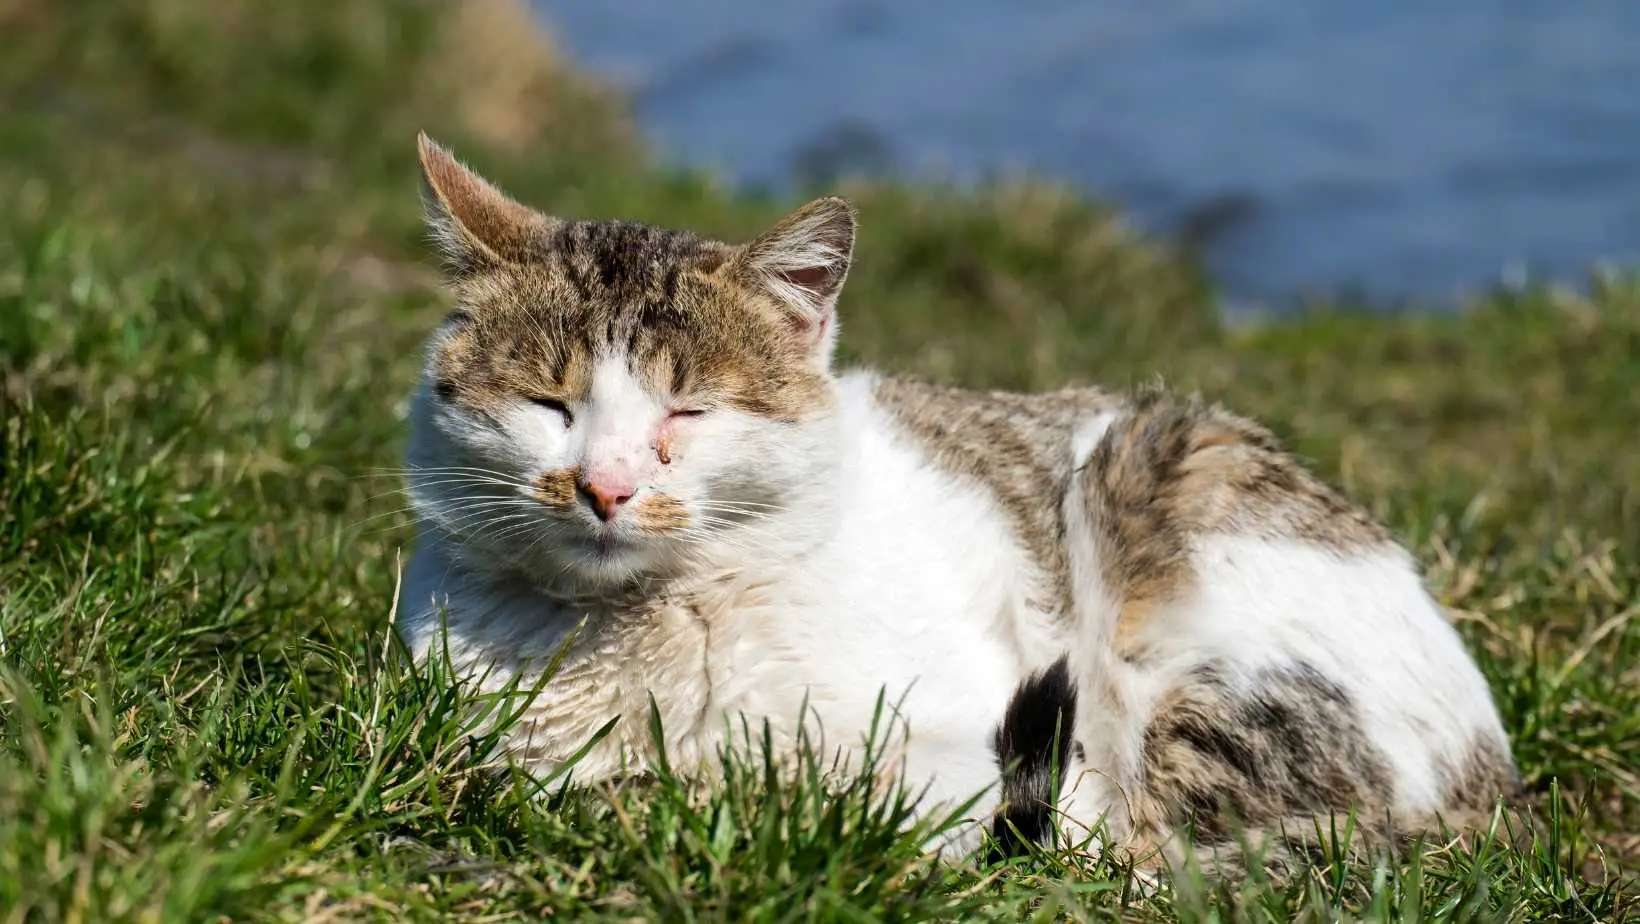 How to Treat Conjunctivitis in Cats?